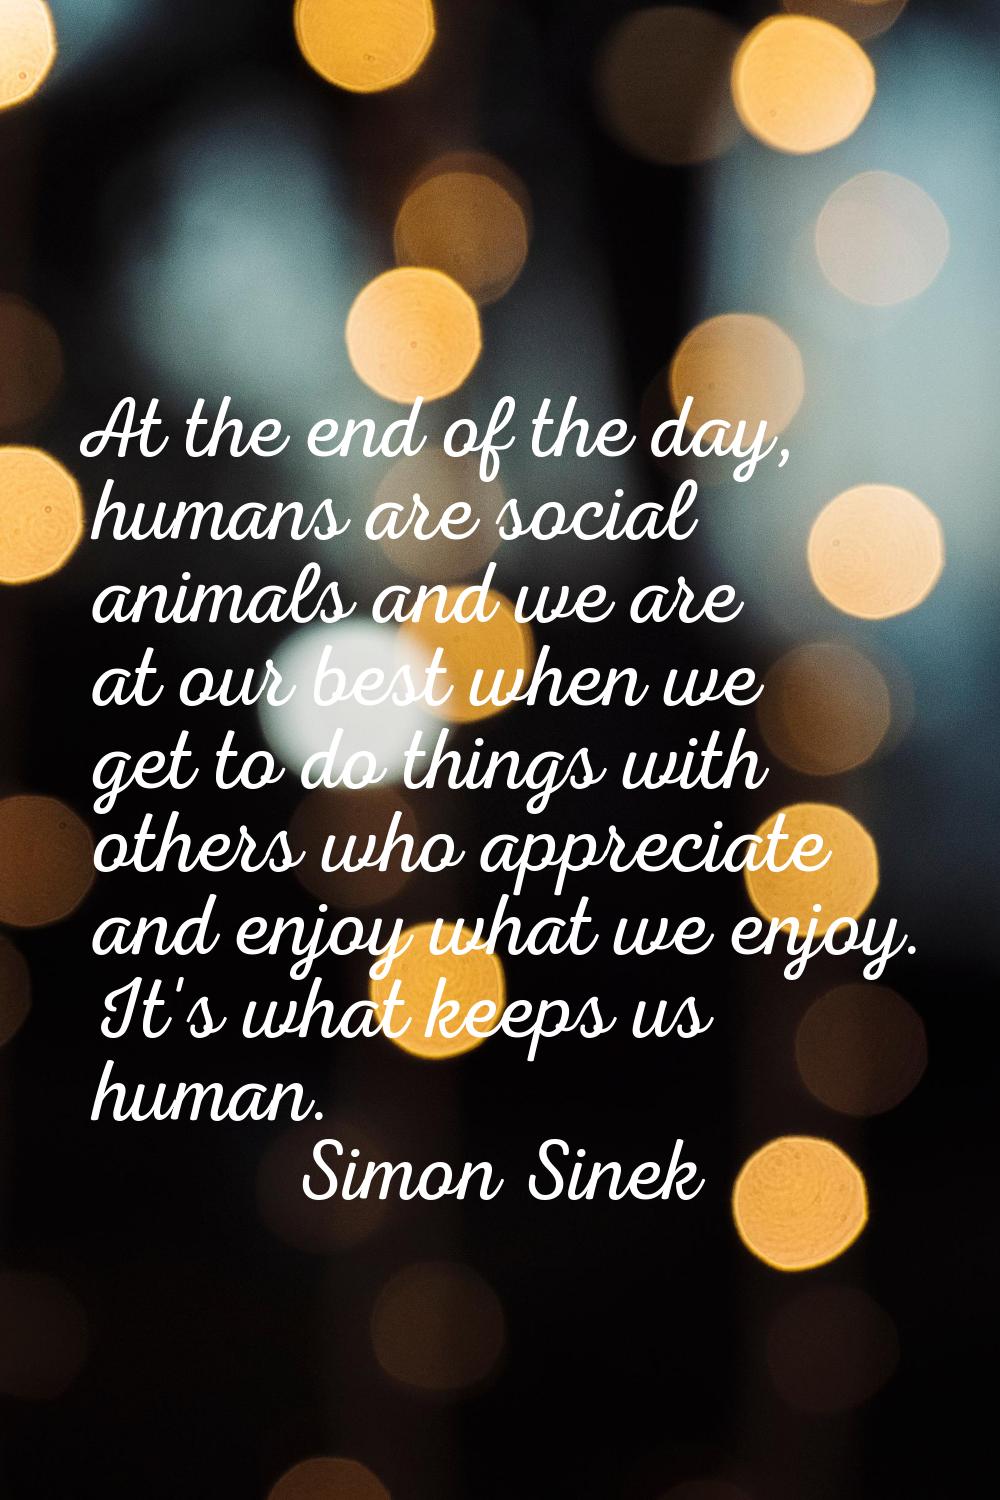 At the end of the day, humans are social animals and we are at our best when we get to do things wi